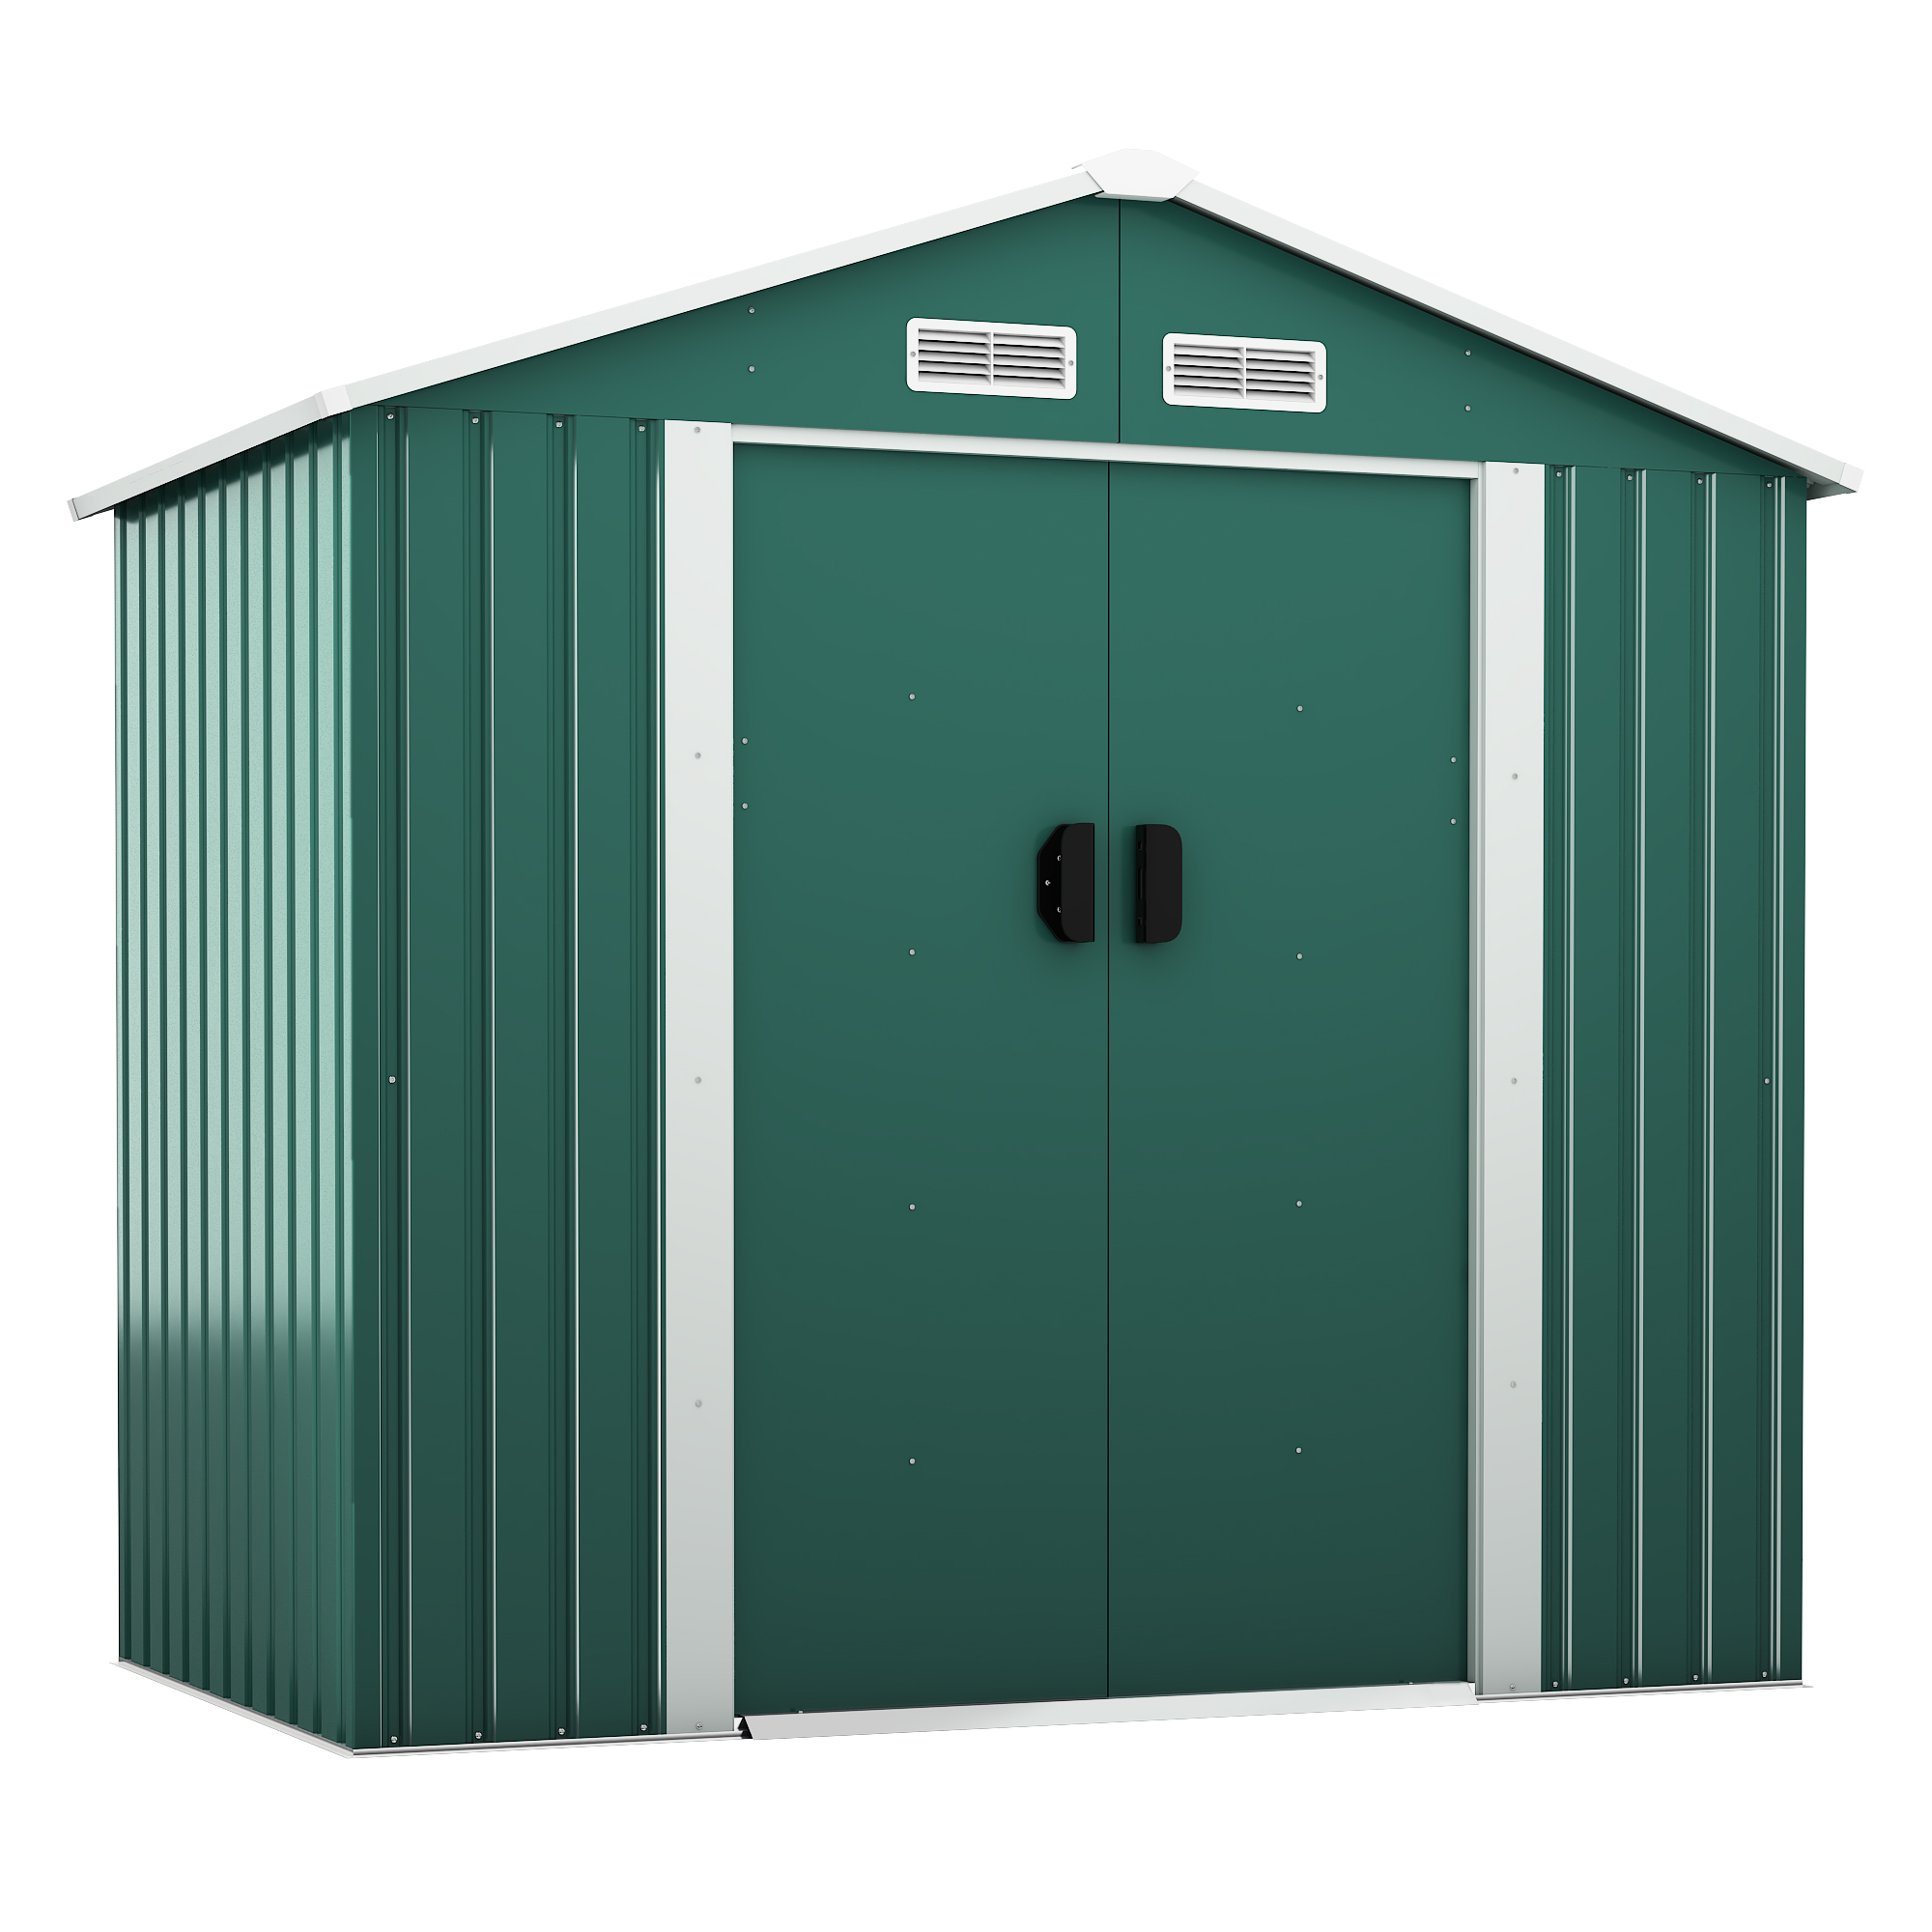 JAXPETY 4.2' x 7' Outdoor Steel Storage Shed, Lawn Equipment Tool Organizer for Backyard Garden w/ Gable Roof